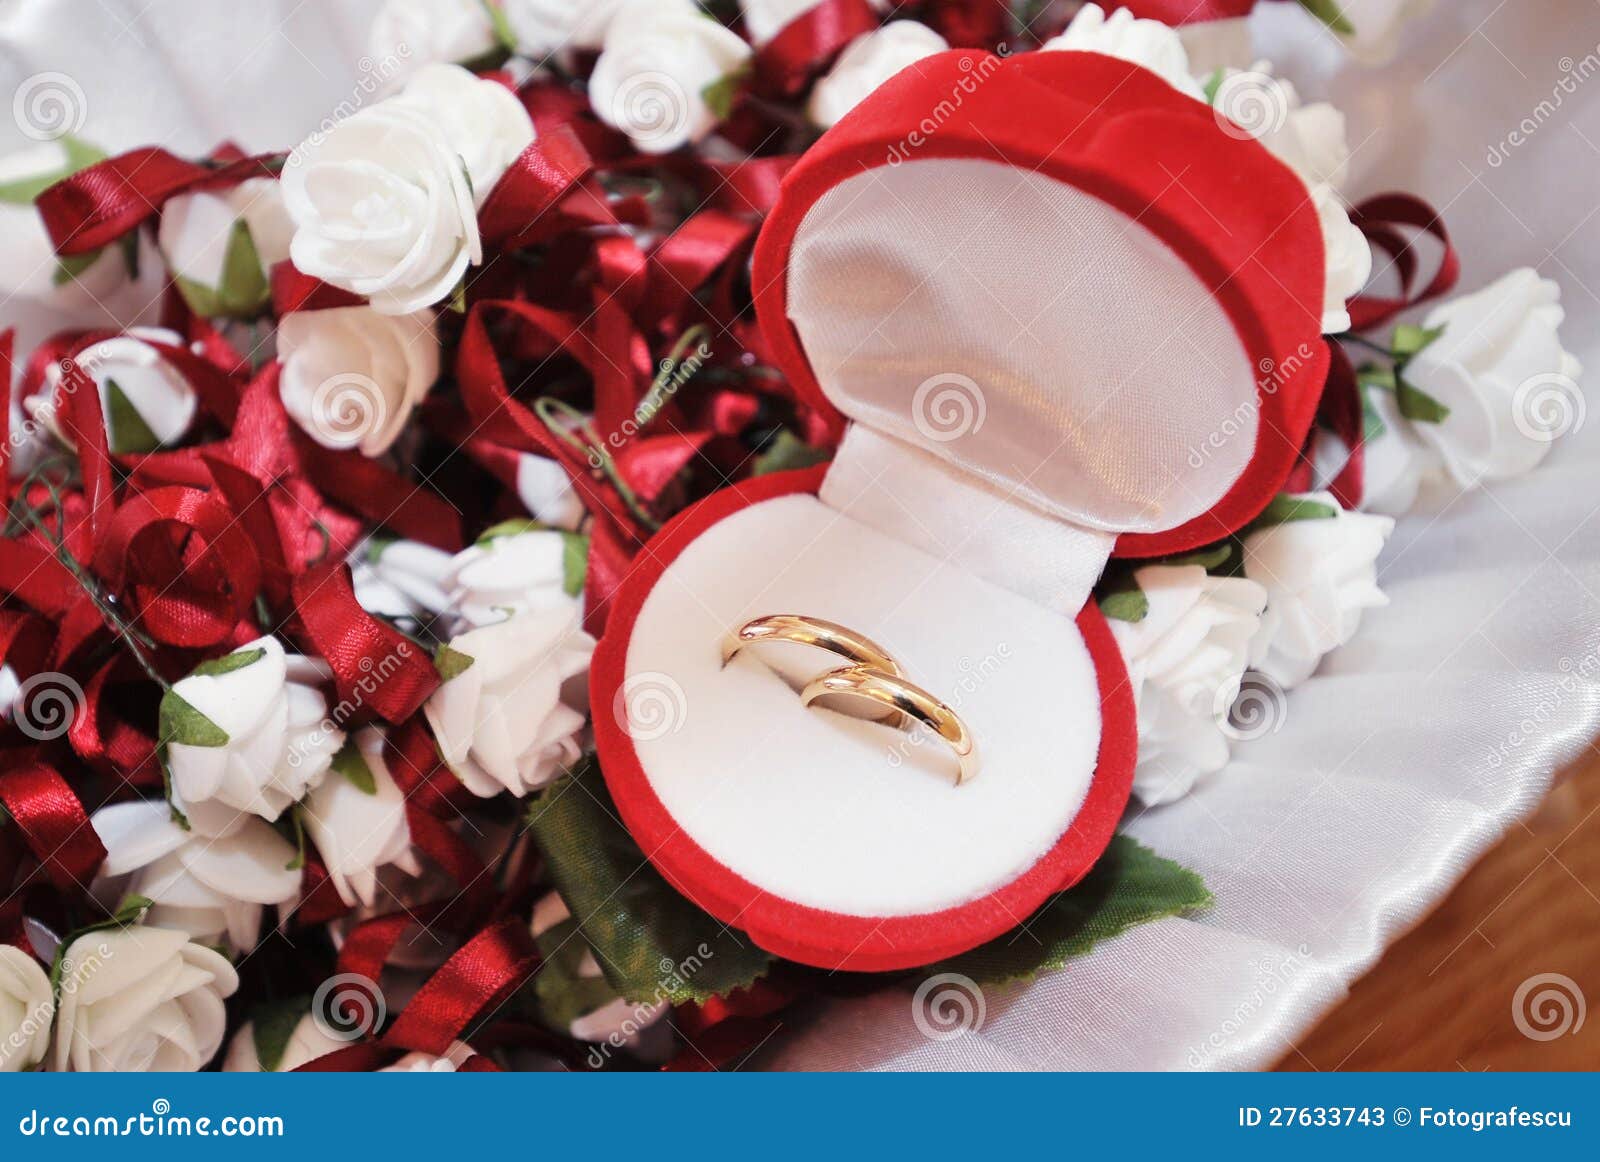 Wedding rings in a box stock image. Image of jewel, objects - 27633743